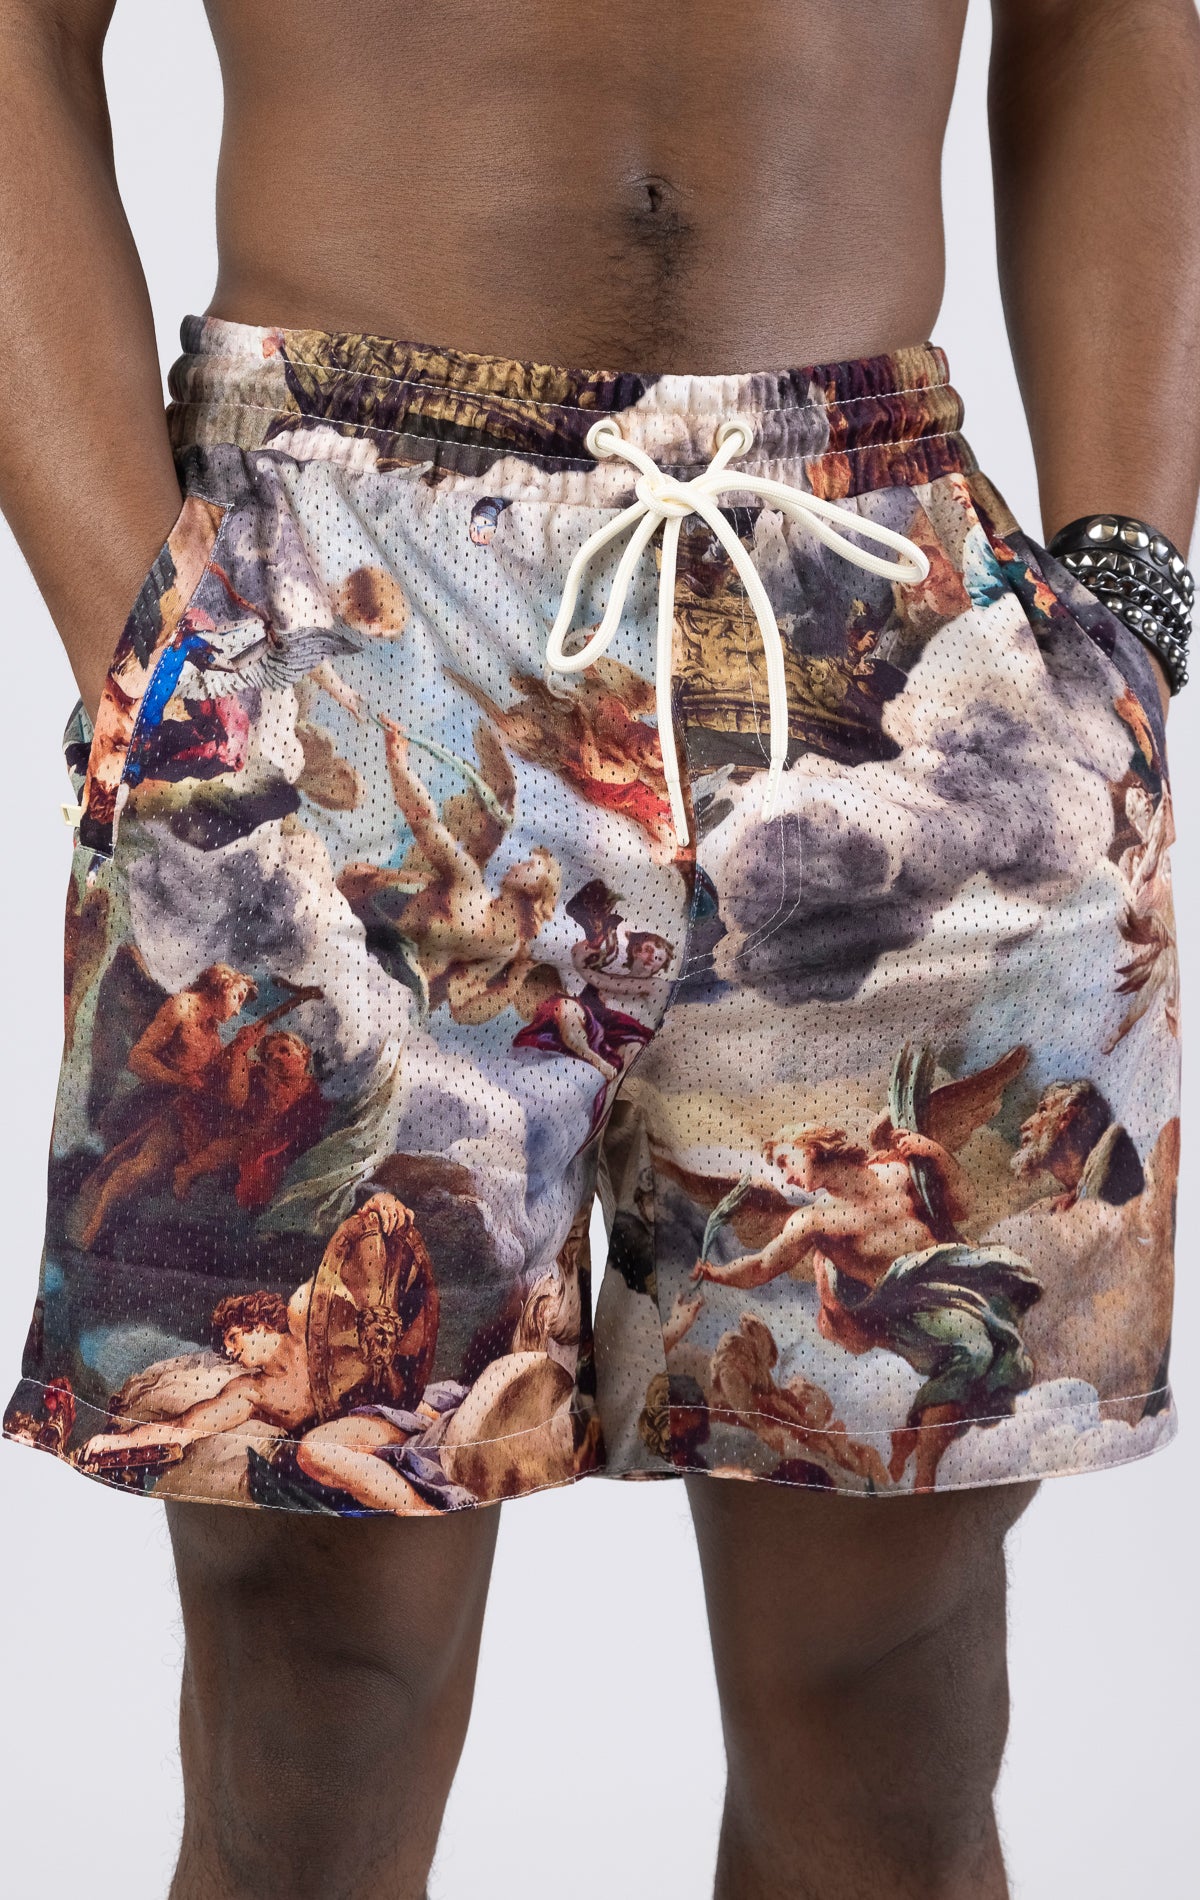 Creme Mesh shorts with an all-over print, zipper side pockets, and a drawstring waist